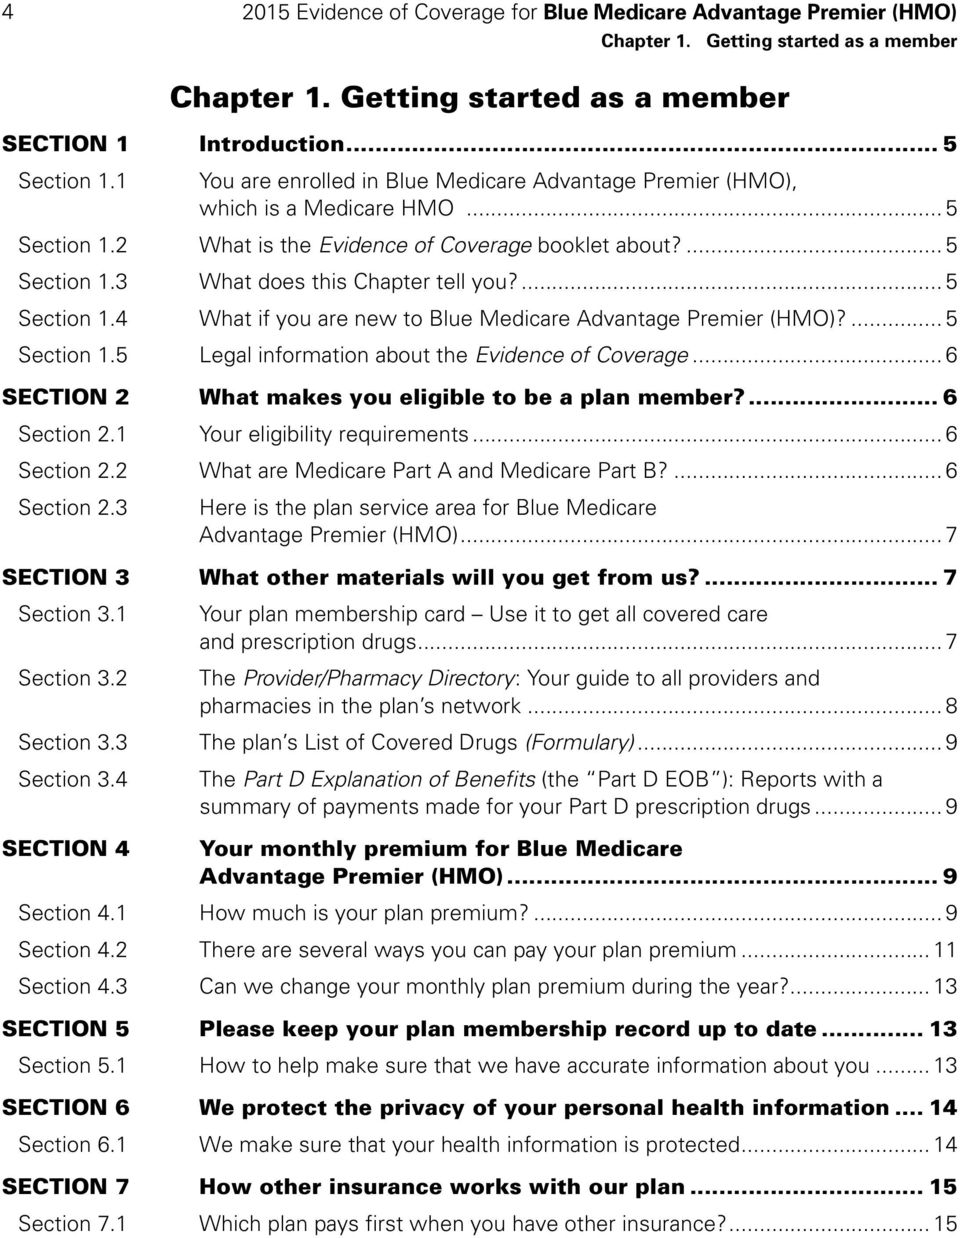 ... 5 Section 1.4 What if you are new to Blue Medicare Advantage Premier (HMO)?... 5 Section 1.5 Legal information about the Evidence of Coverage.